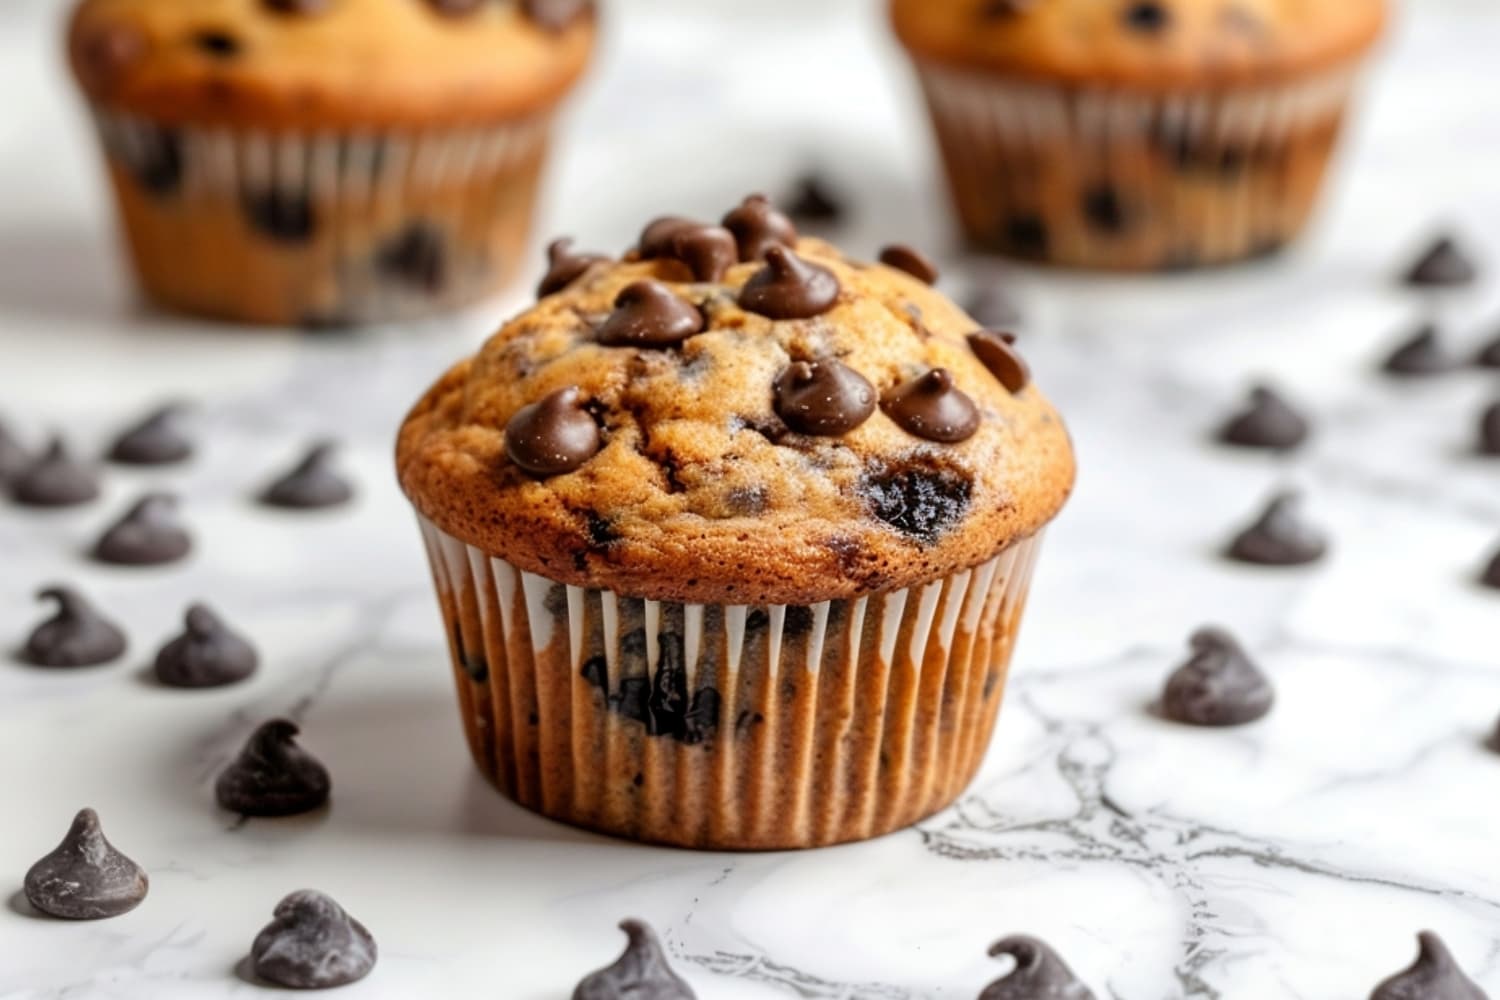 Delicious homemade kodiak cake muffins with chocolate chips filled with blueberries